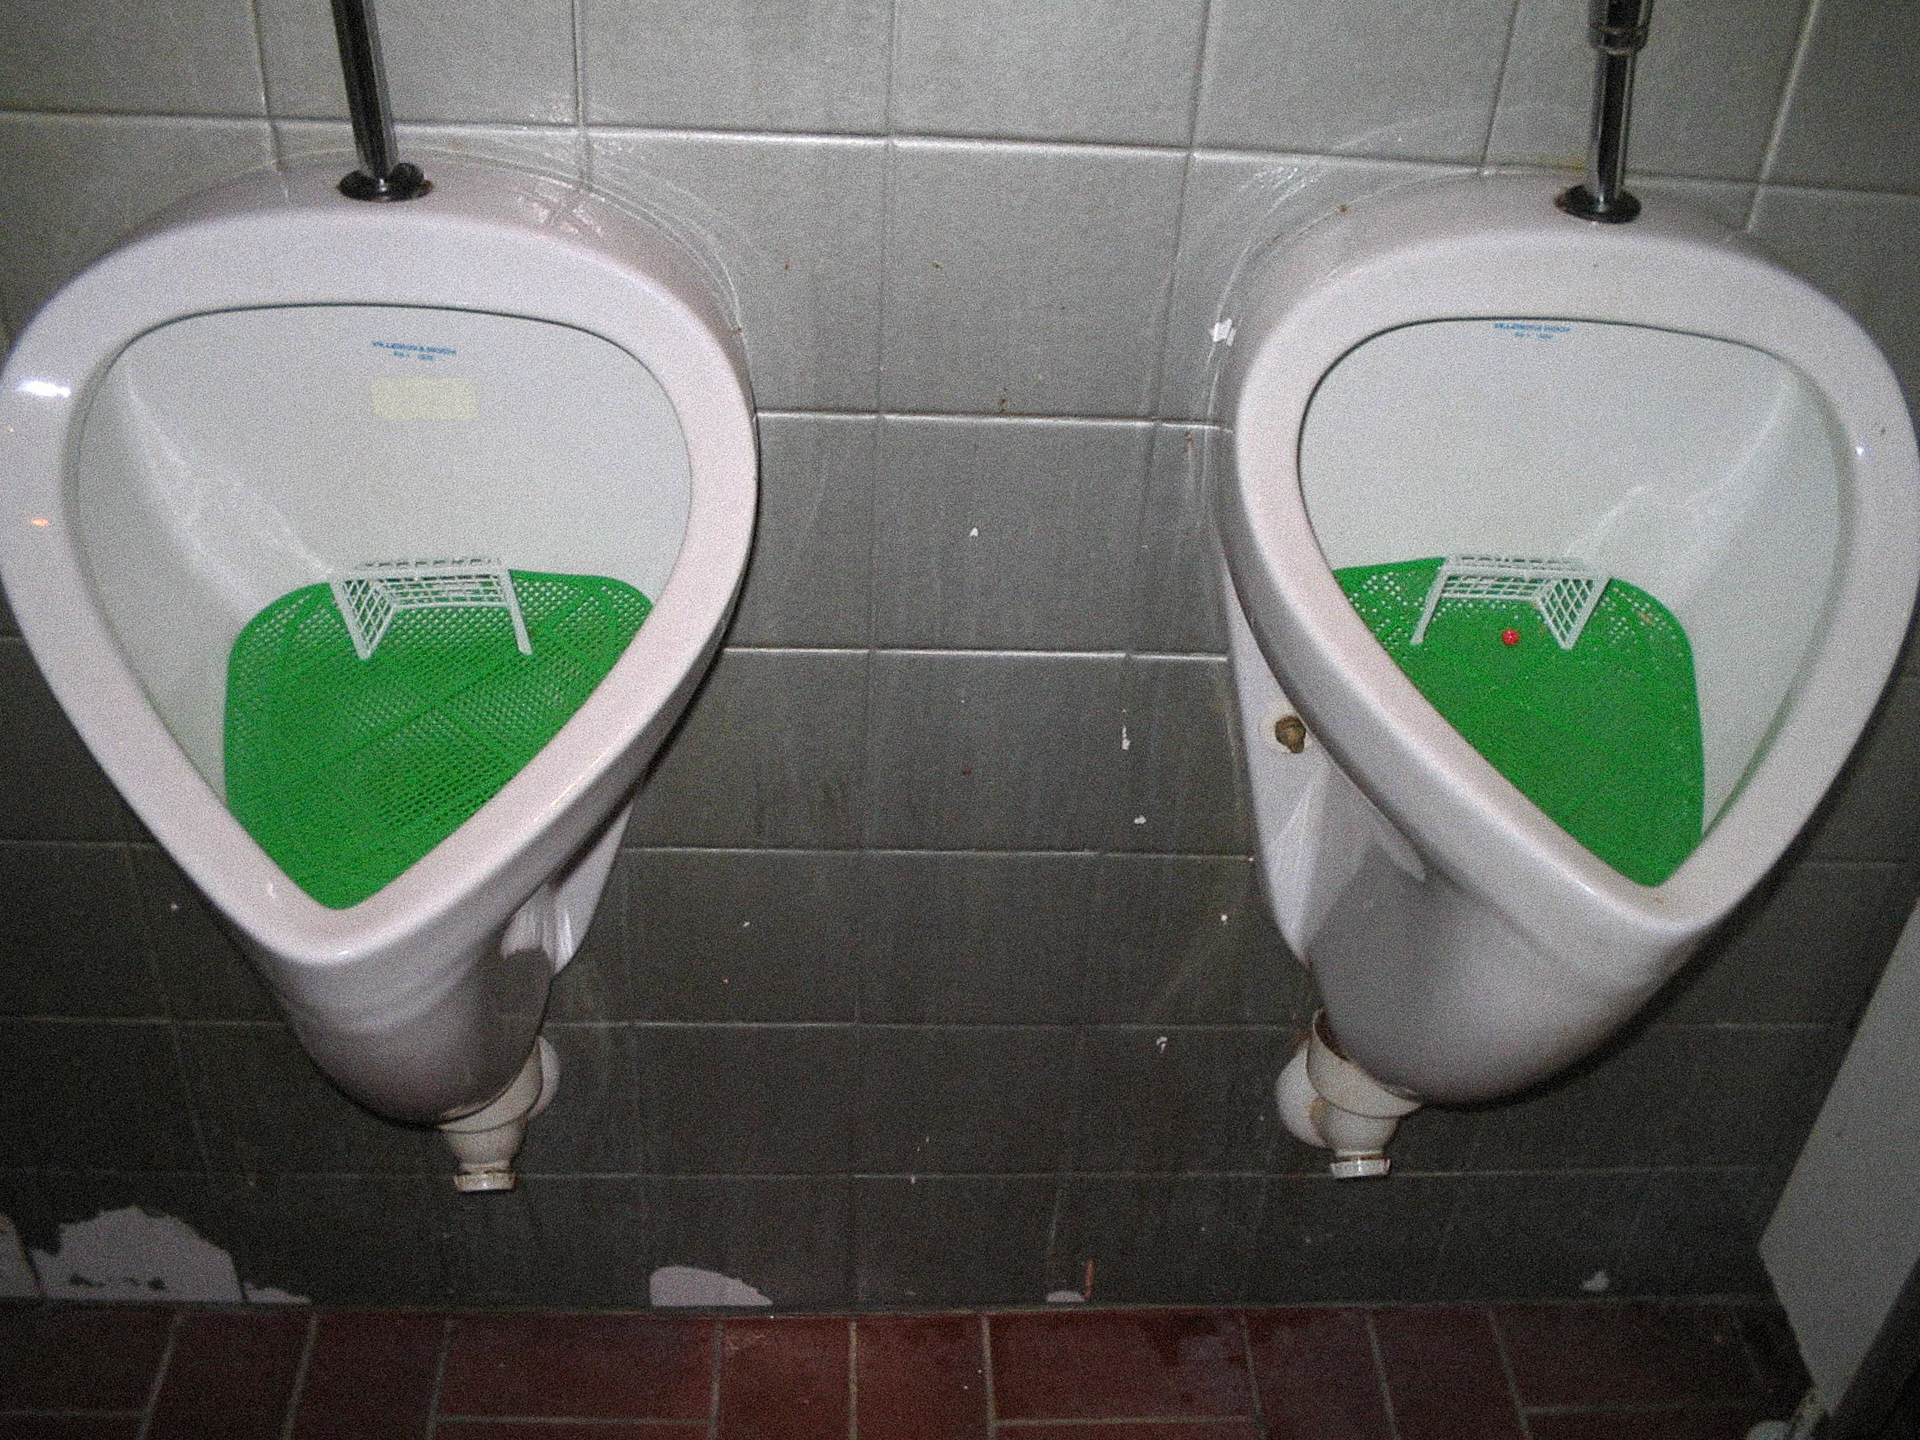 germany world cup 2006 piss goal (1 of 1)